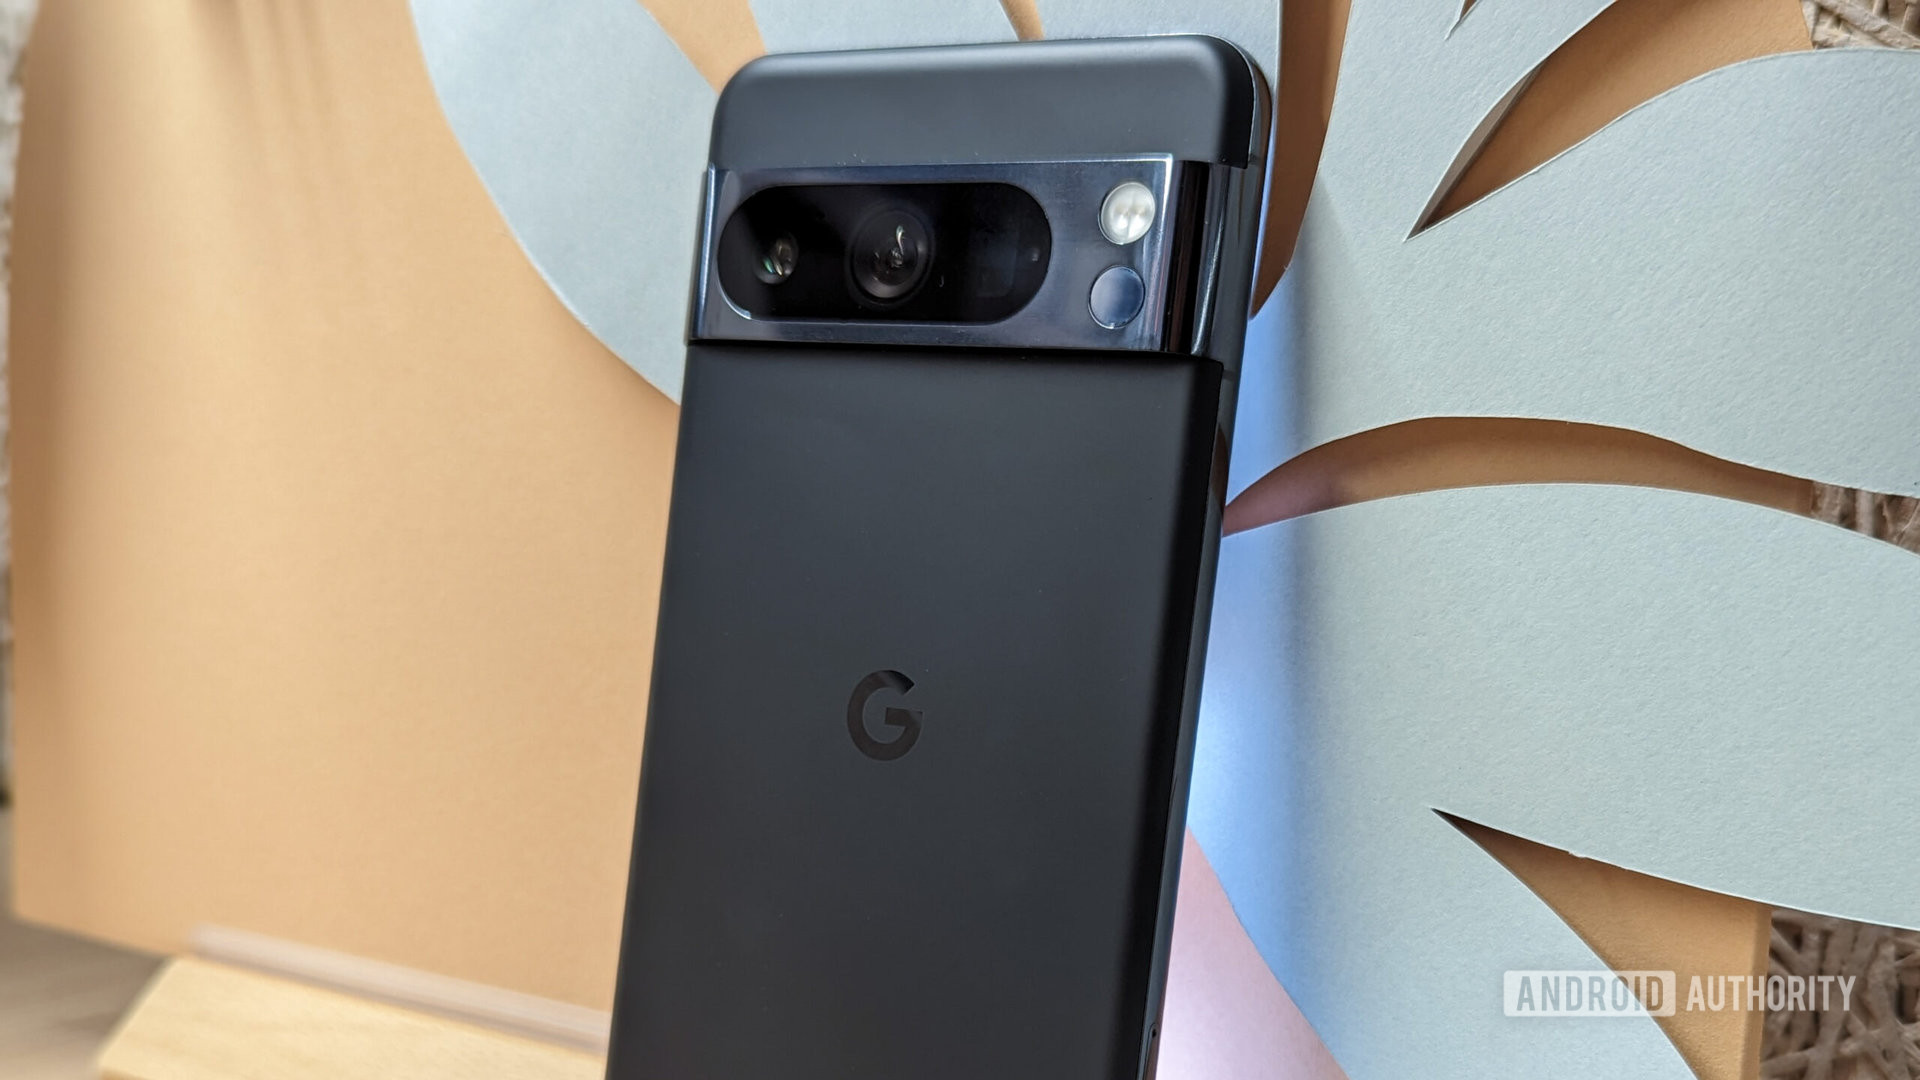 Preferred Care for Pixel devices is a confusing service